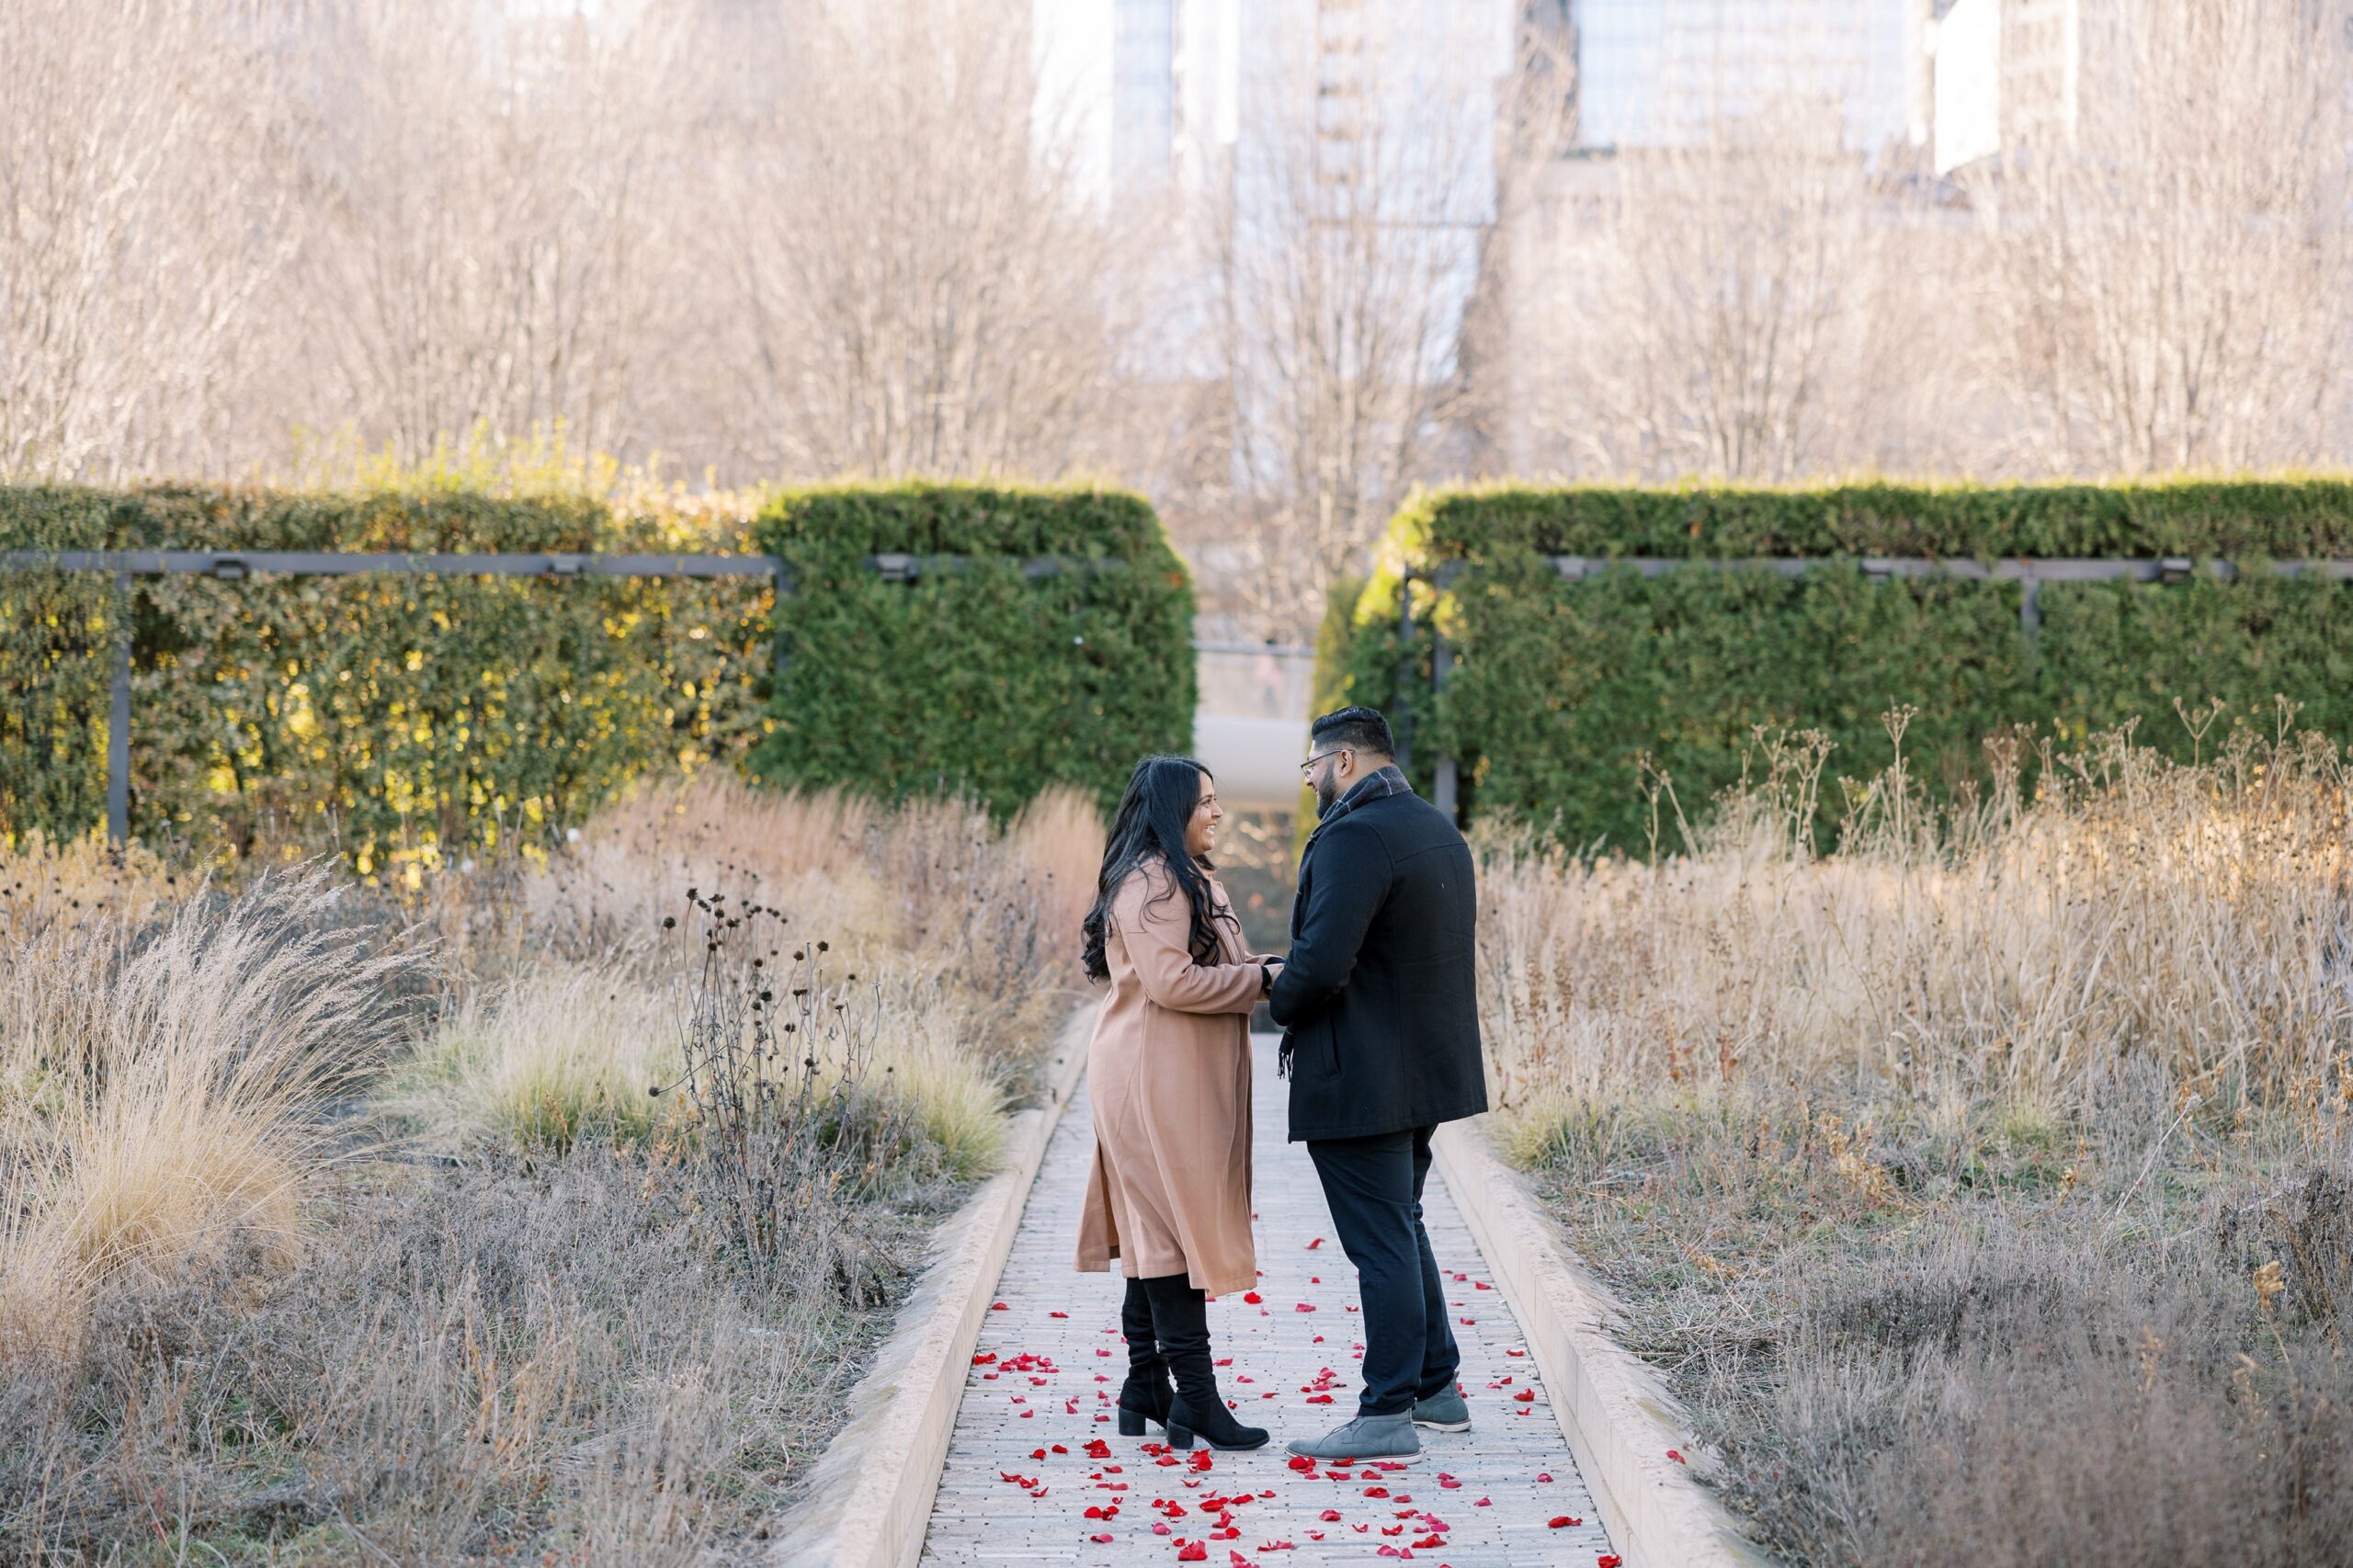 Man and woman in a garden in Chicago